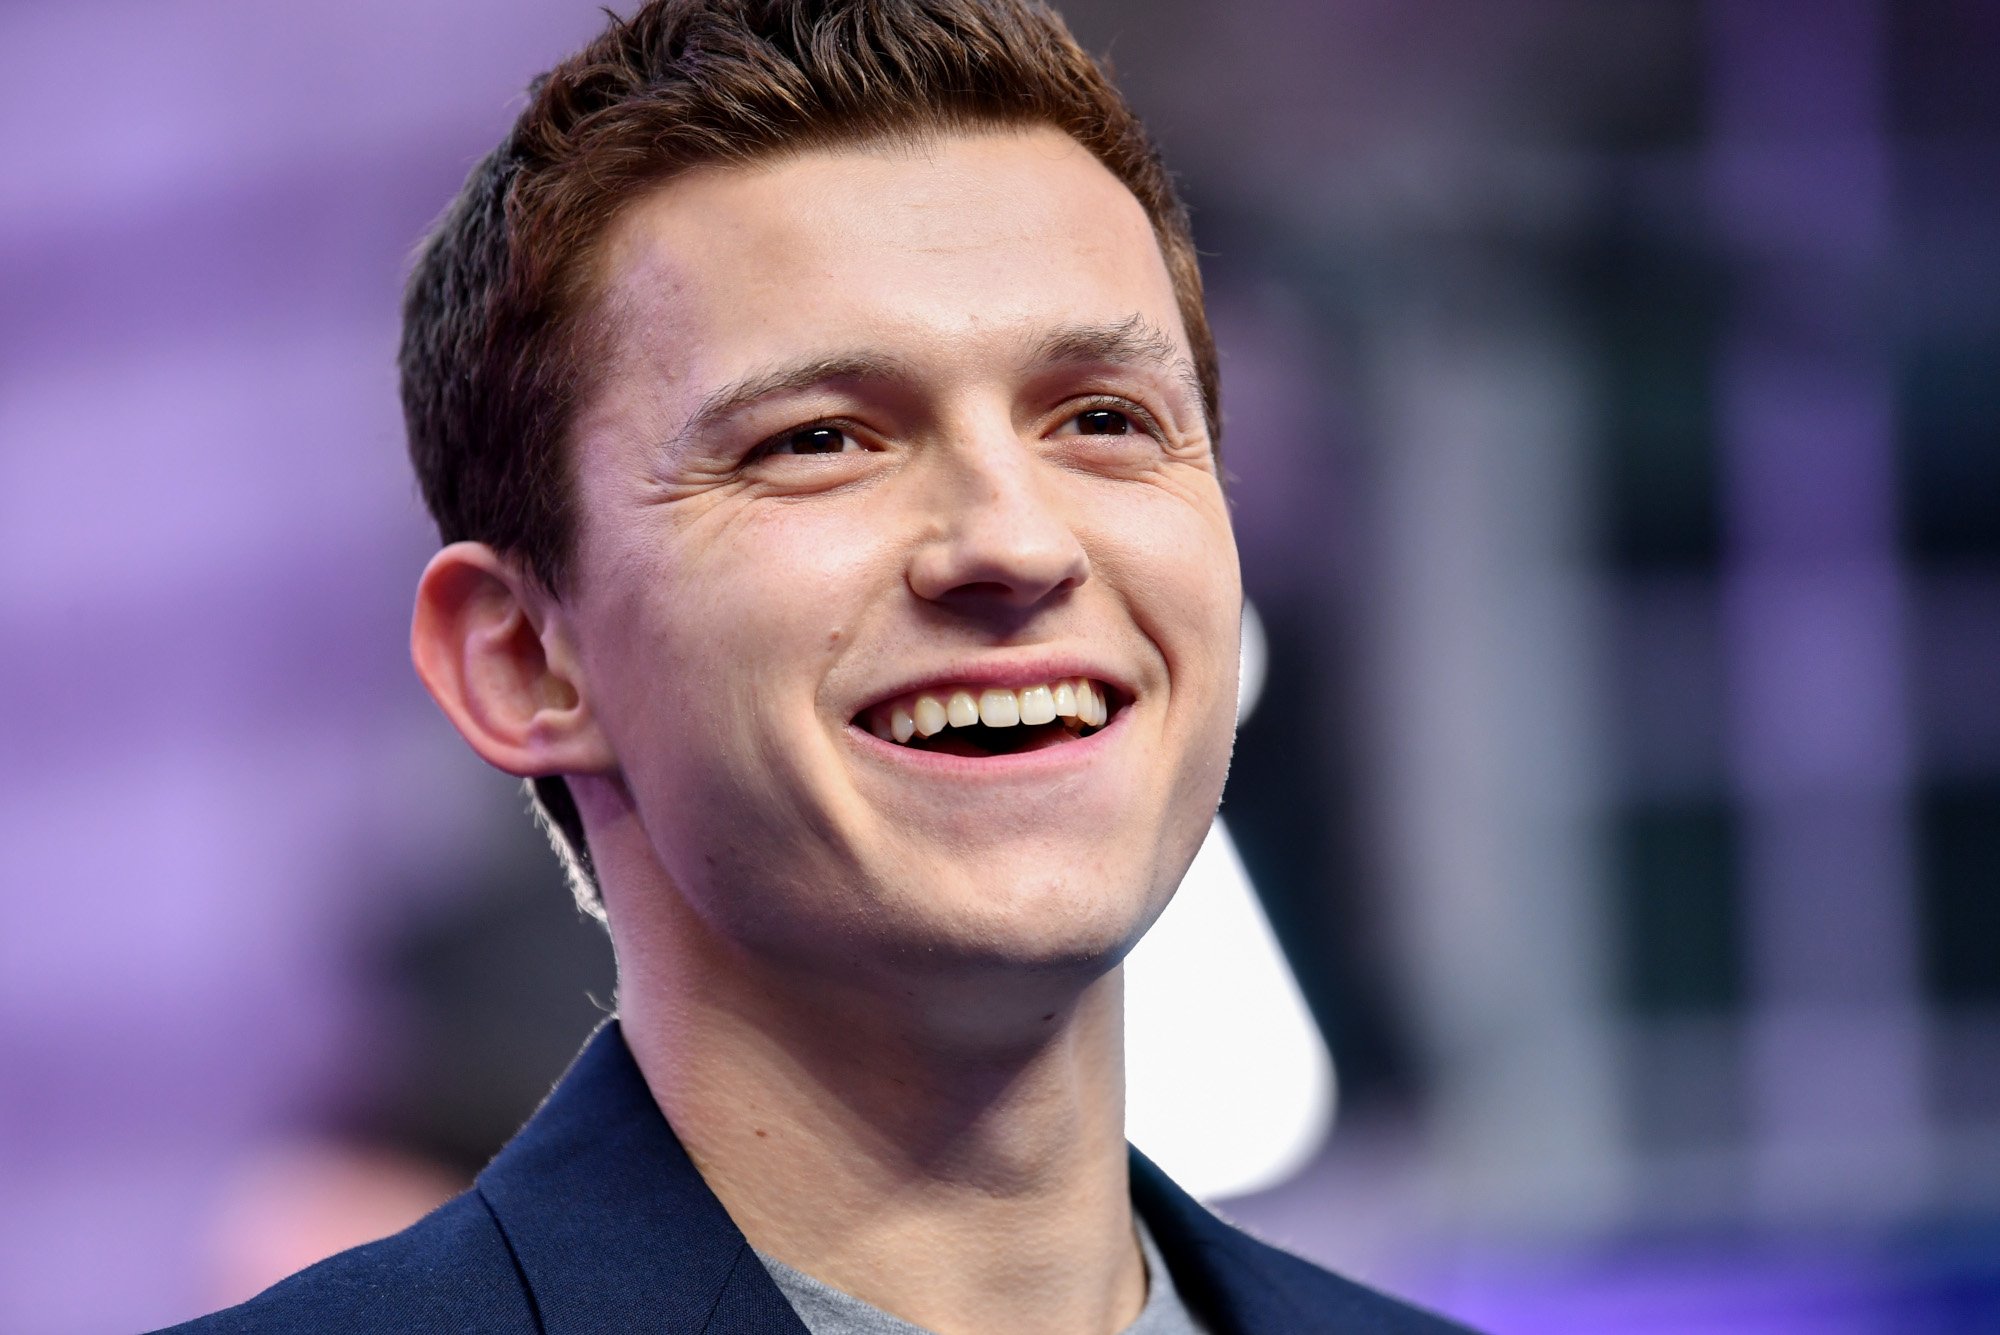 Spider-Man star Tom Holland, who does not appear in episode 5 of Marvel's 'What If...?' The photo shows him from the neck up. He's wearing a dark blue suit and smiling up at something.